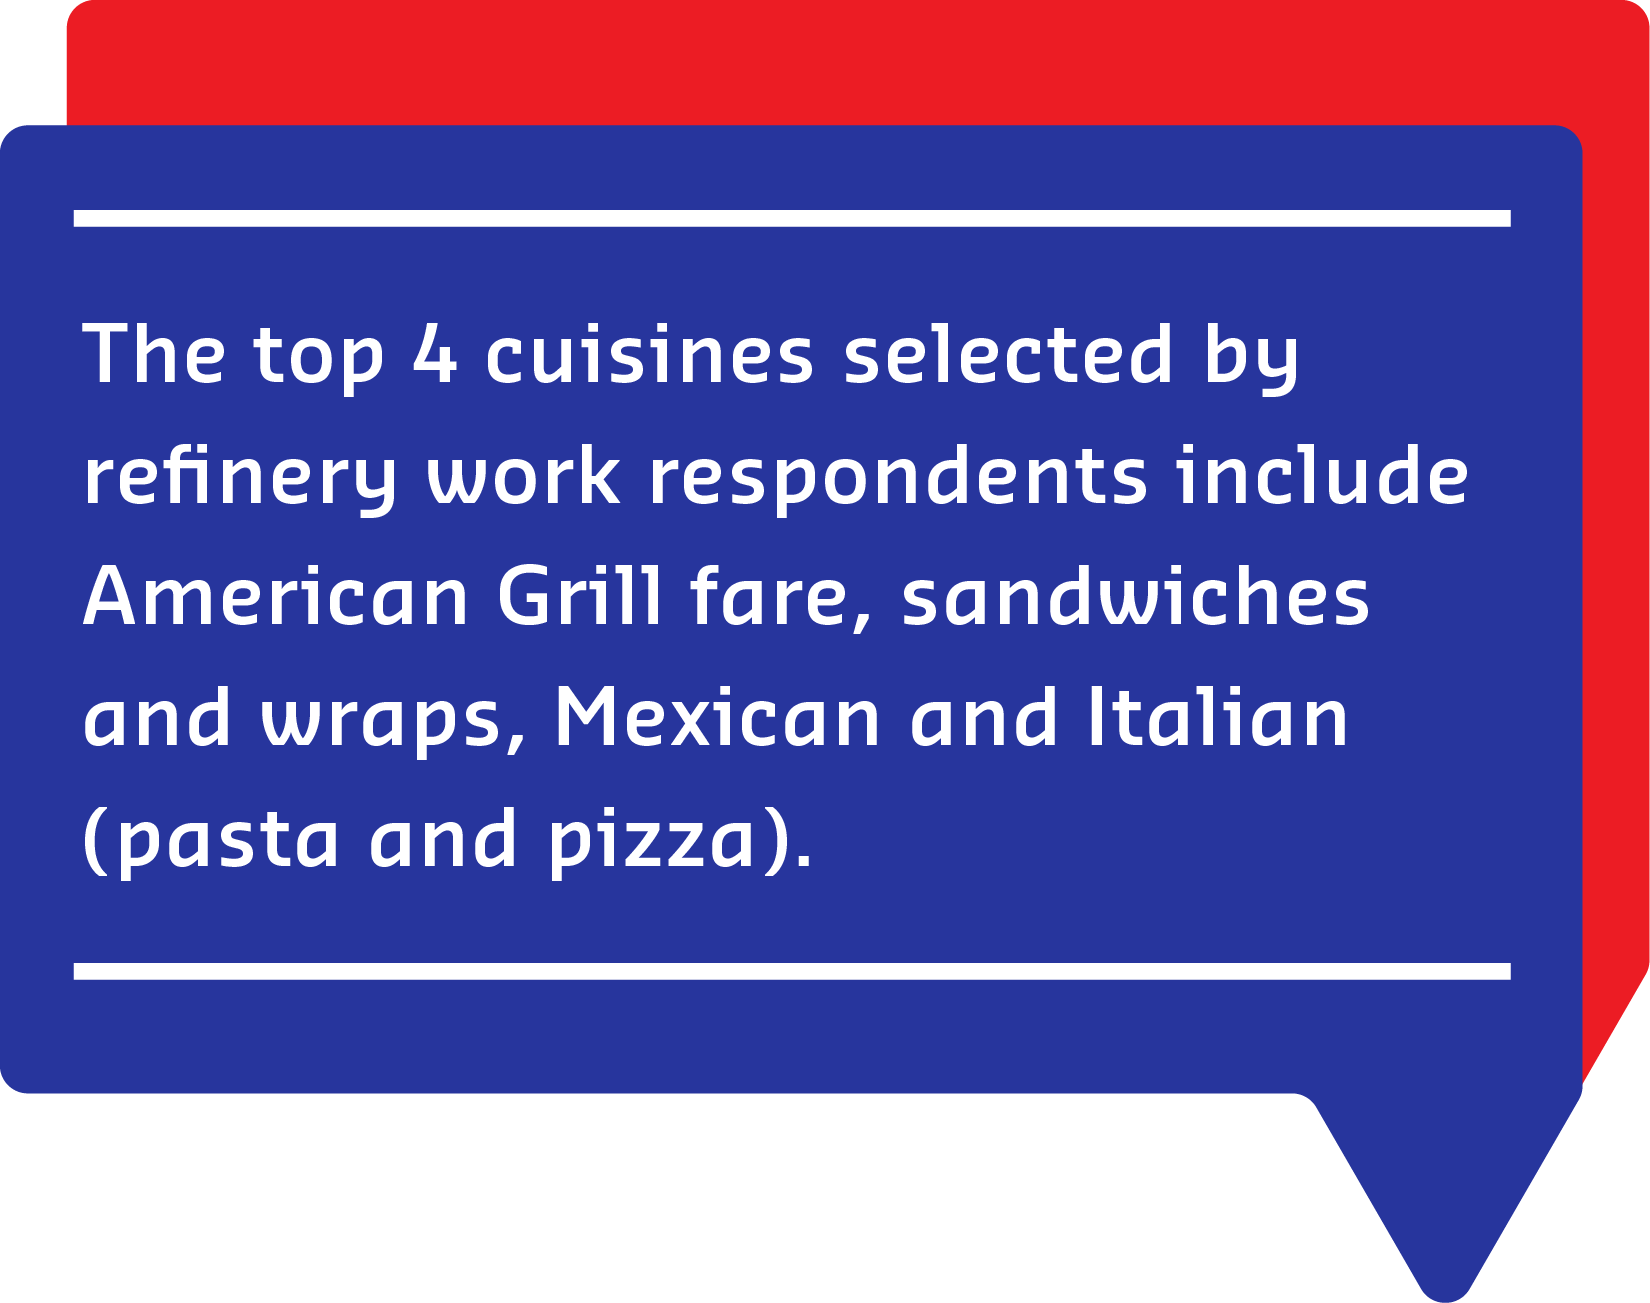 The top 4 cuisines selected by refinery work respondents include American Grill fare, sandwiches and wraps, Mexican and Italian (pasta and pizza). 